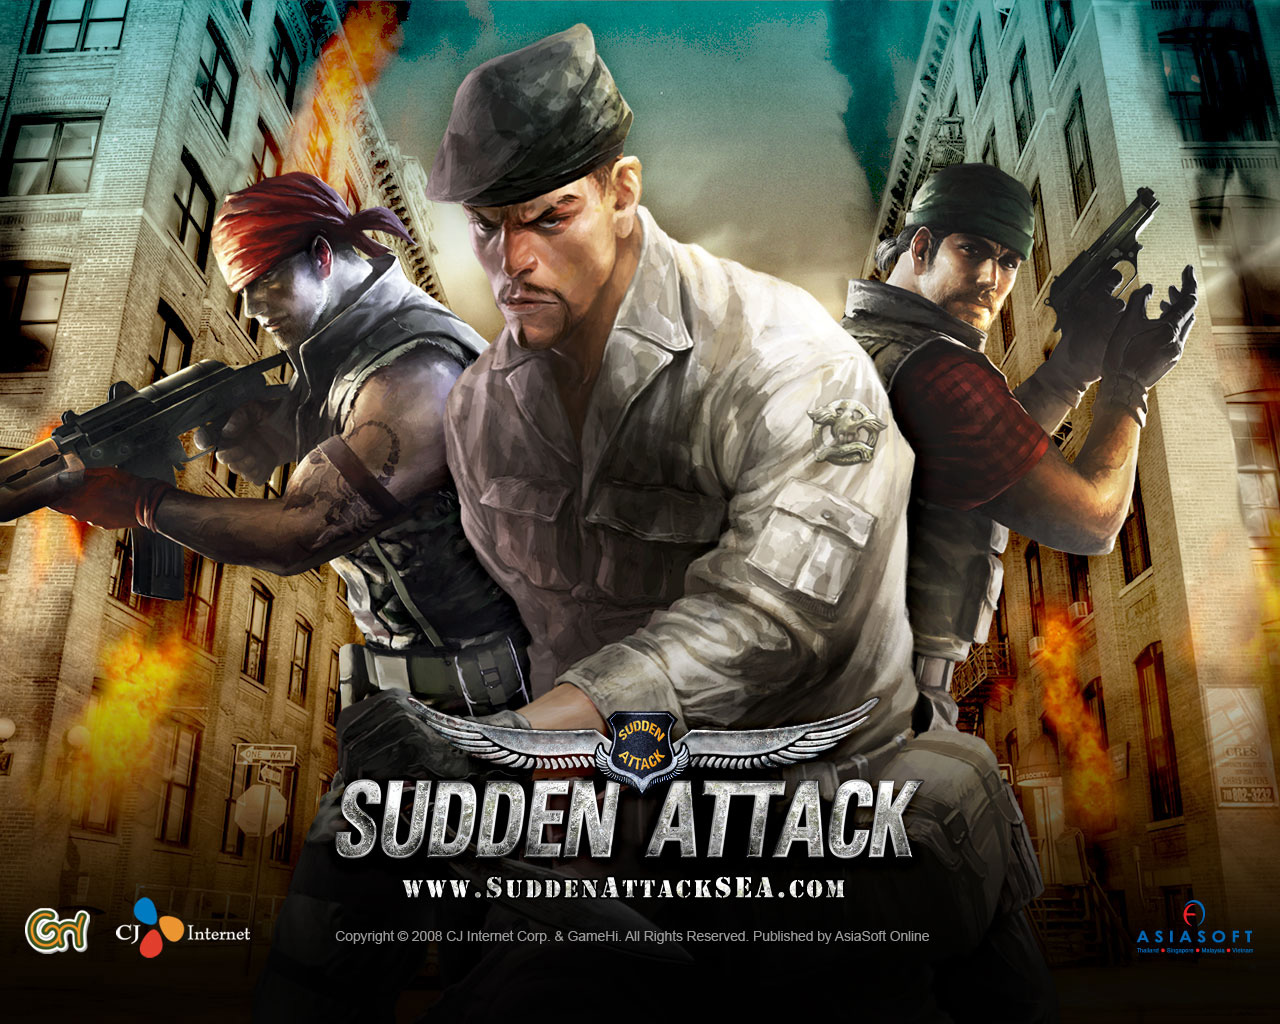 Pictures Sudden Attack vdeo game